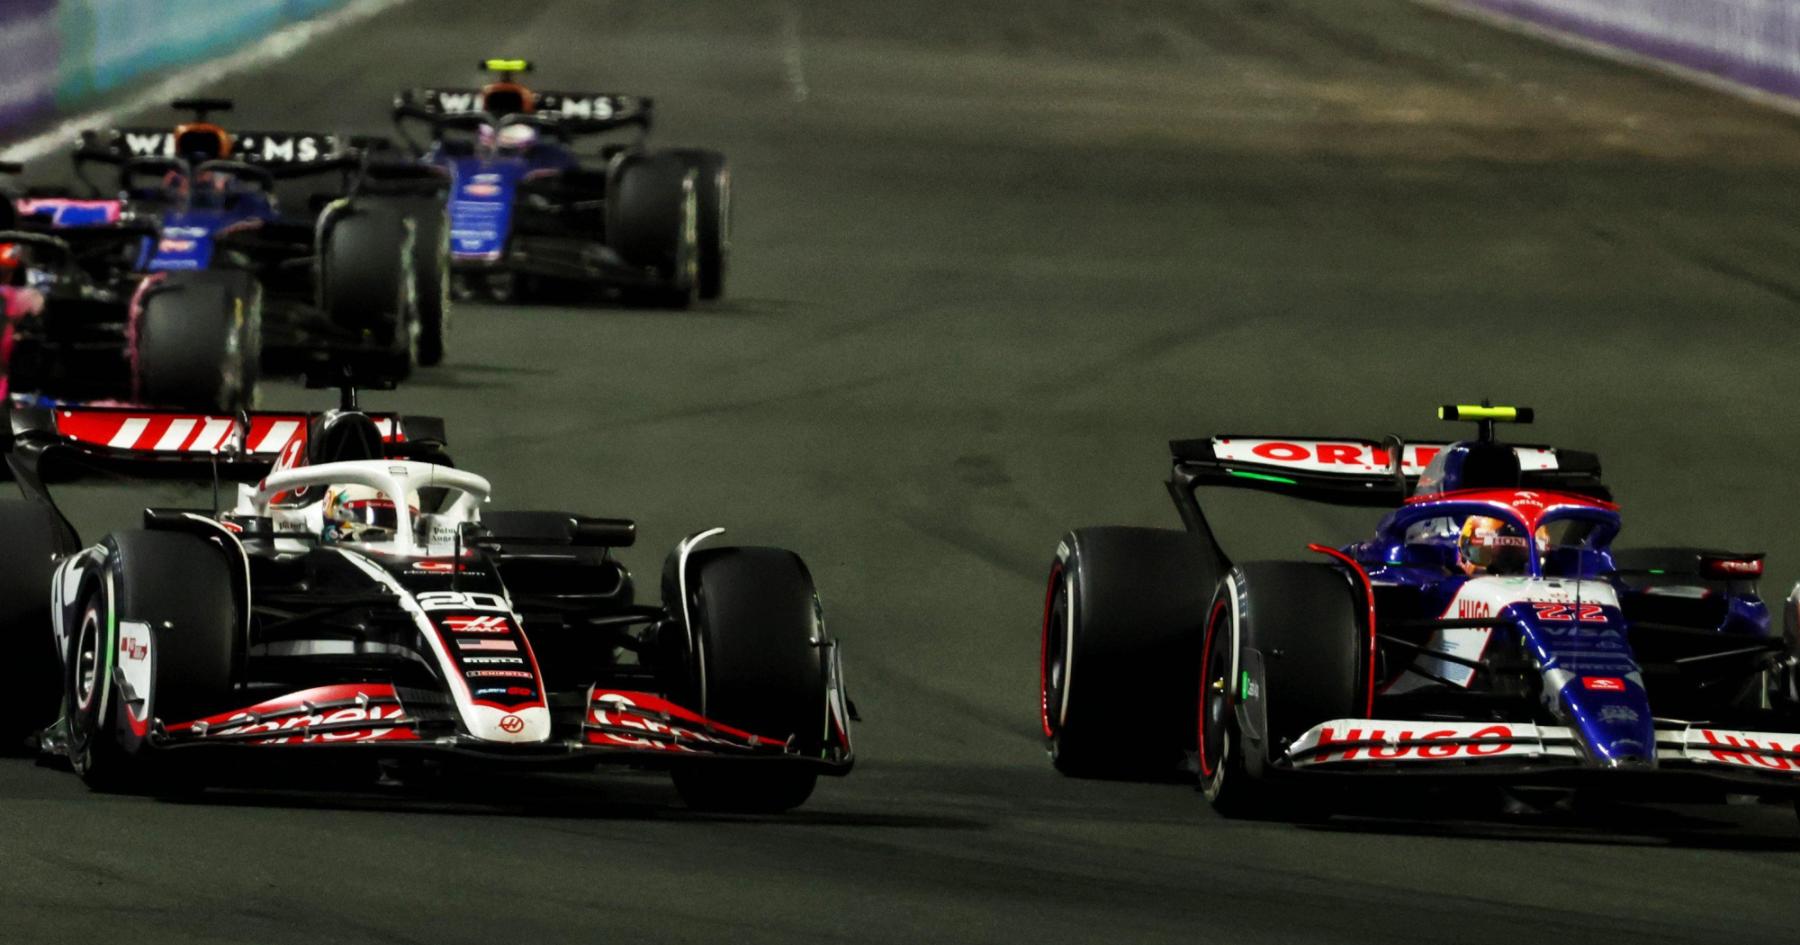 Taking a Stand: Haas F1 Team Denounces Unsportsmanlike Claims in Saudi Arabia as Baseless